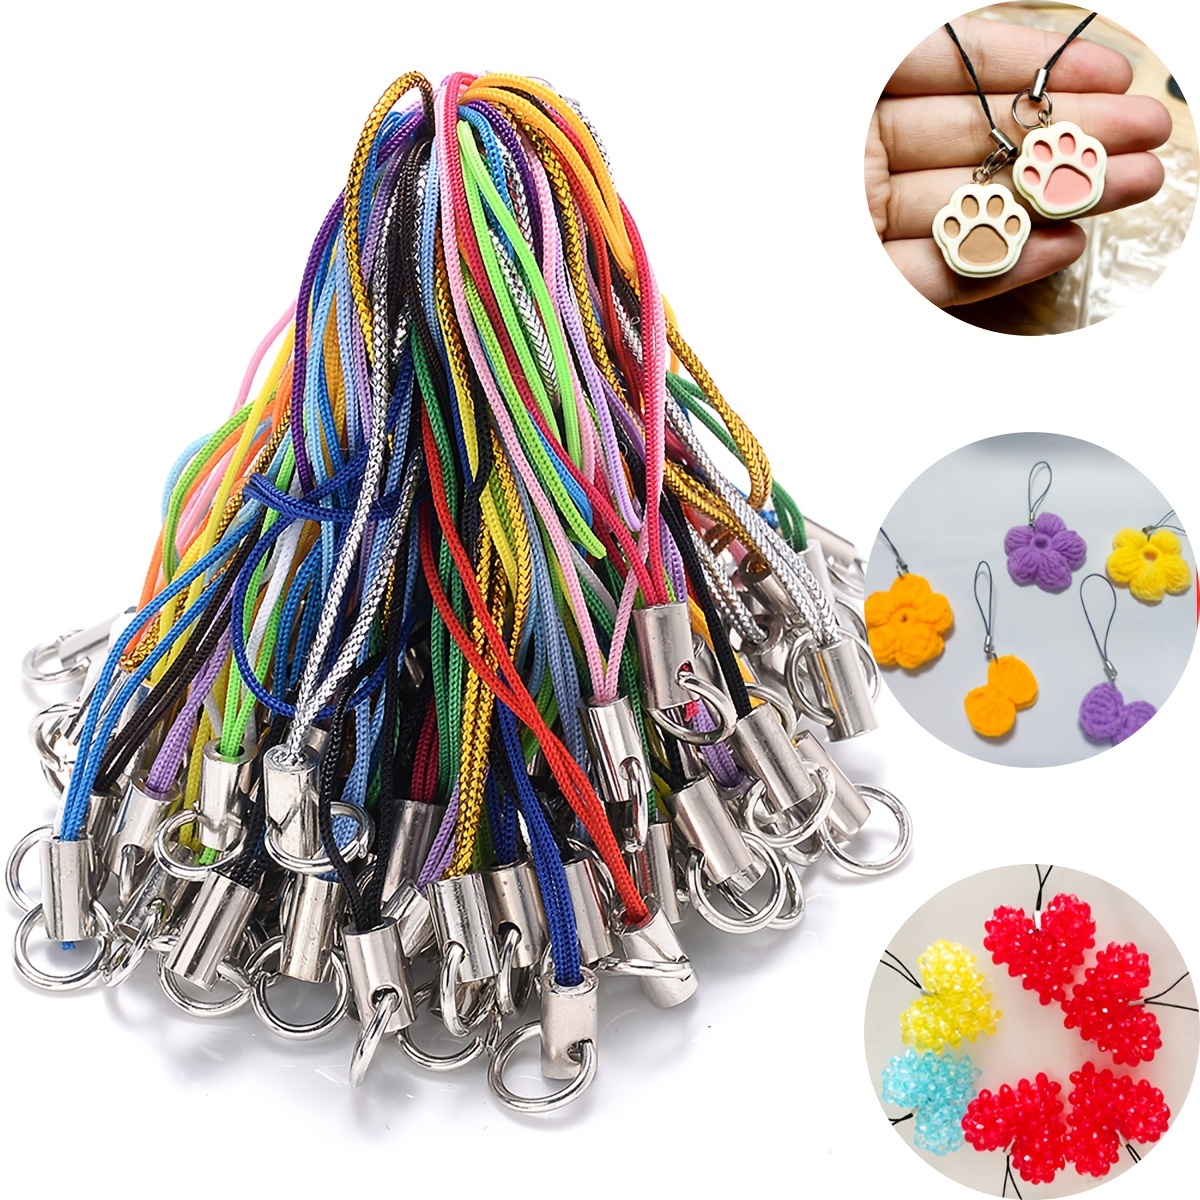 

50/100pcs Mix Color Lobster Clasp Rope Jump Ring Clasp Lanyard Rope Keychains Lariat Strap Cords Nylon Thread Key Ring Phone Case Cords For Diy Jewelry Making Accessories Small Business Supplies